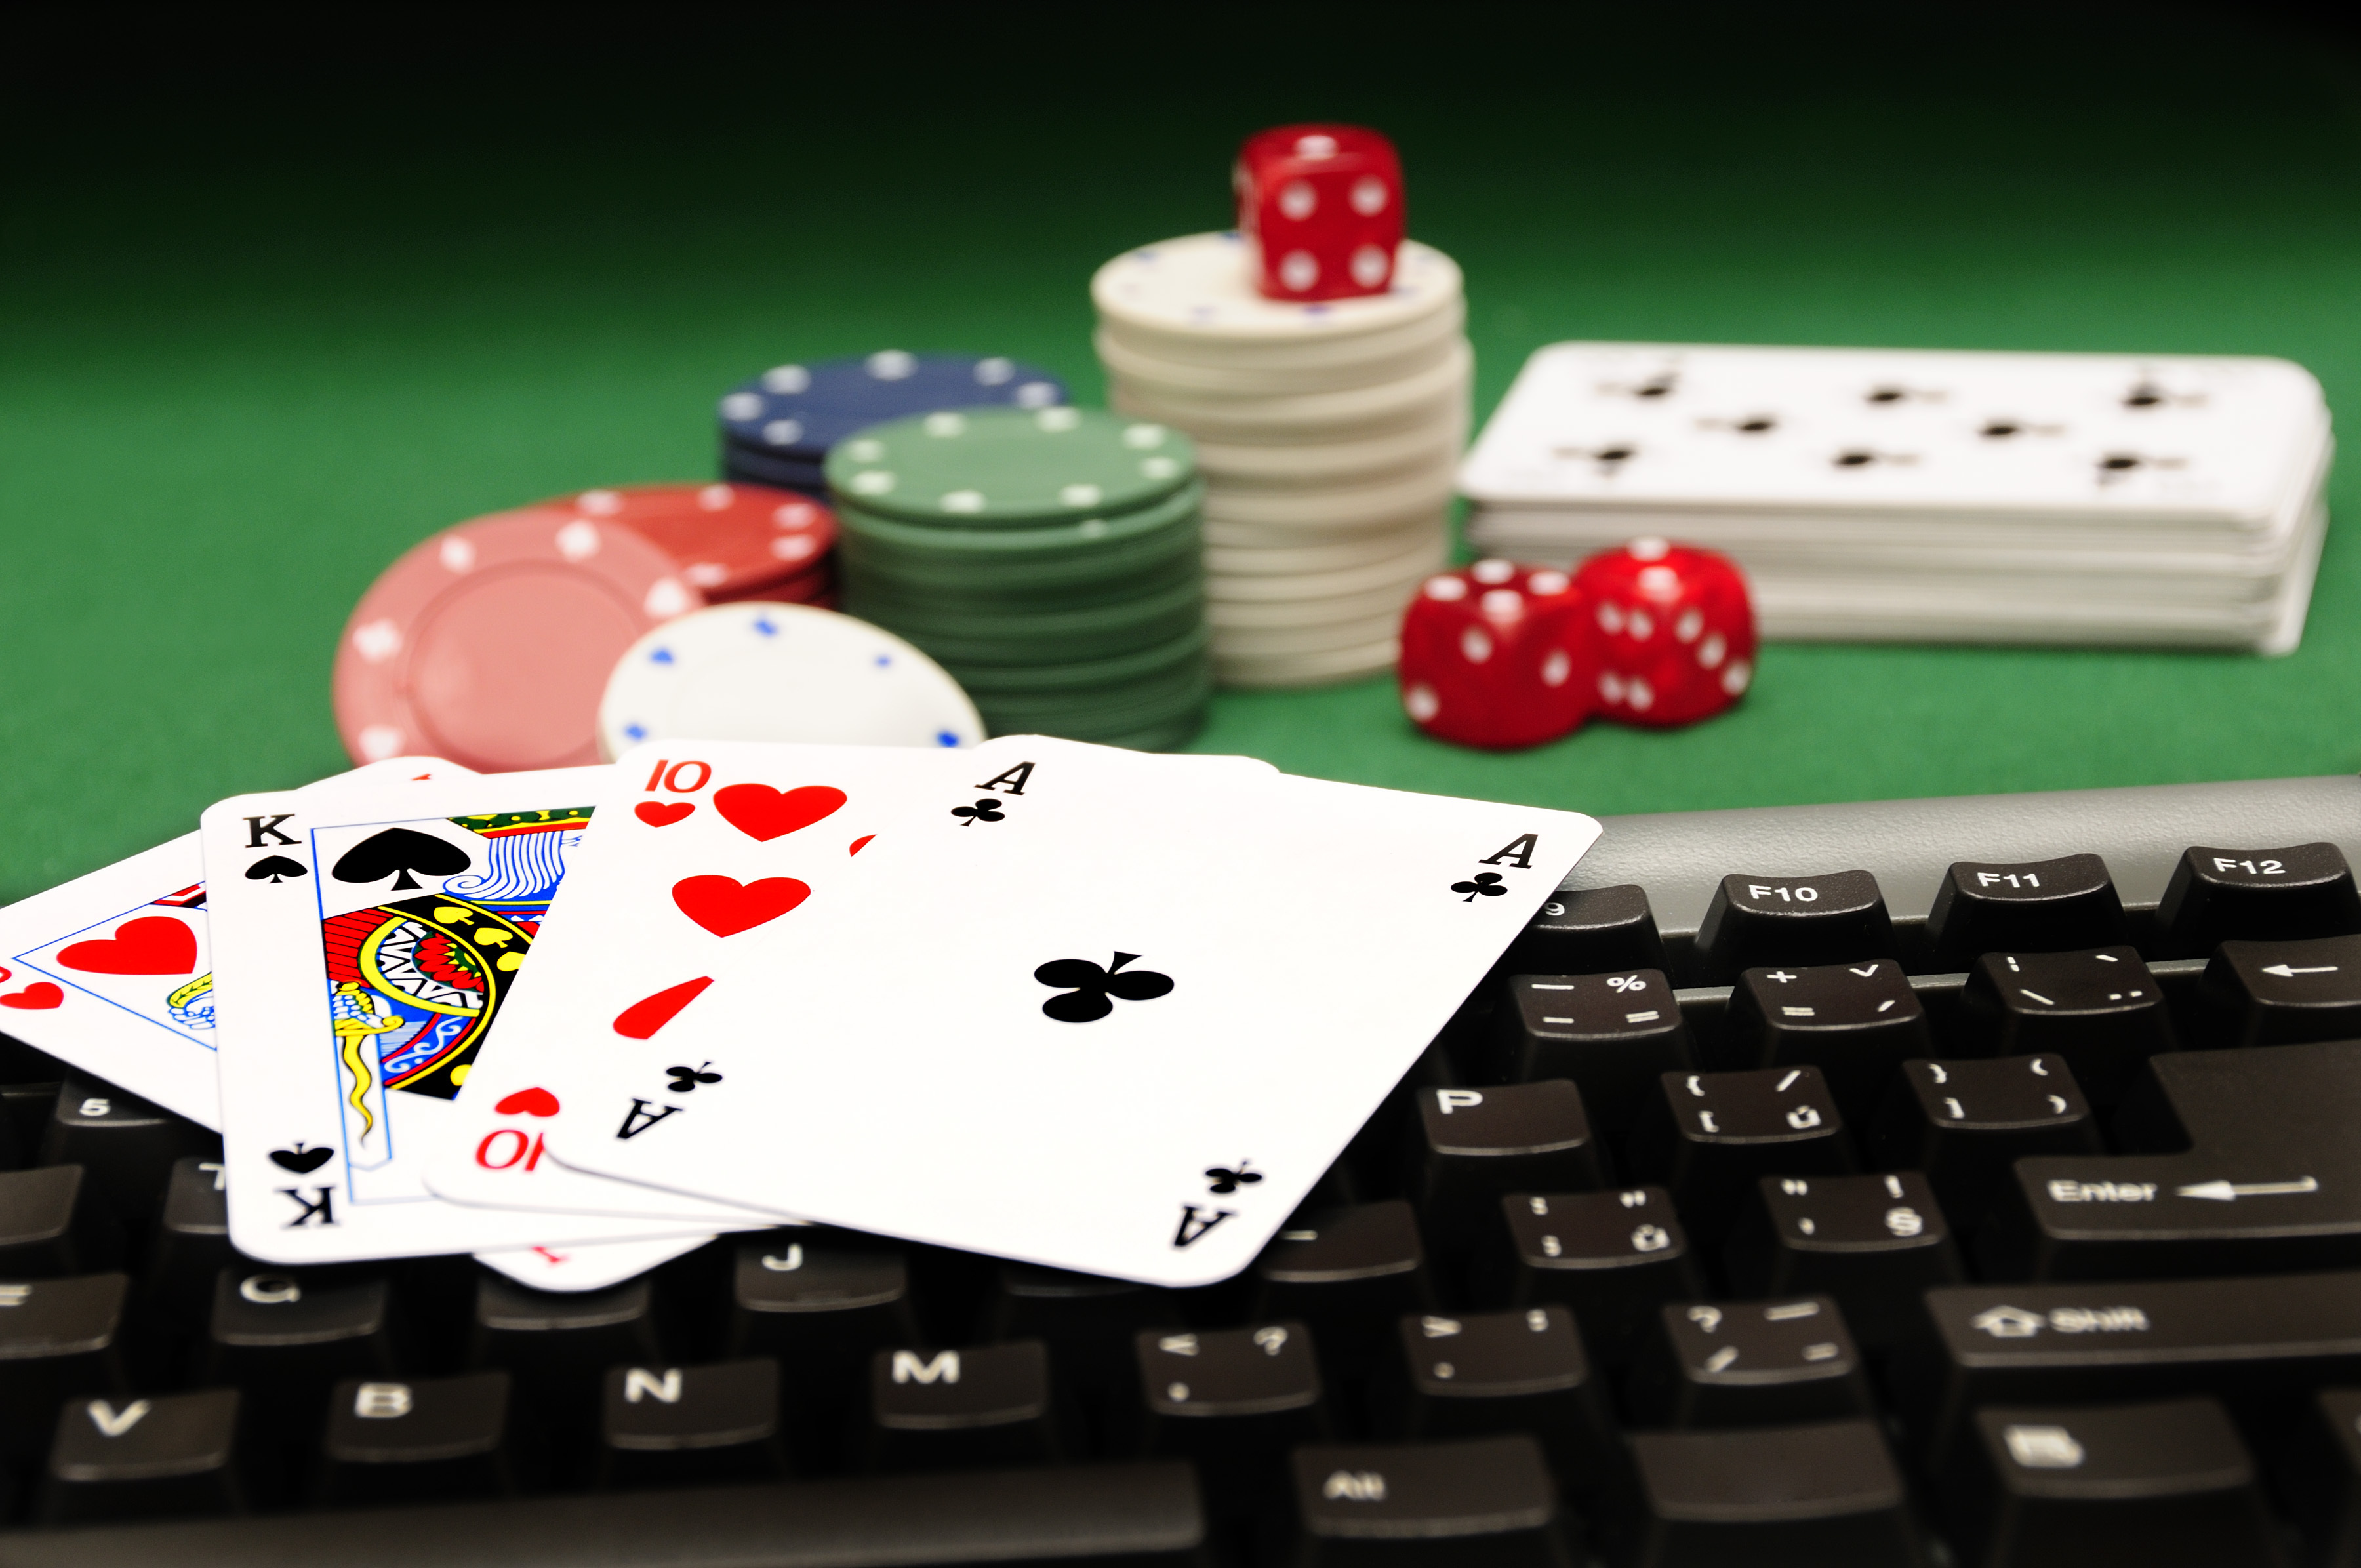 Revolutionary Online Gambling Casino! All You Need To Know